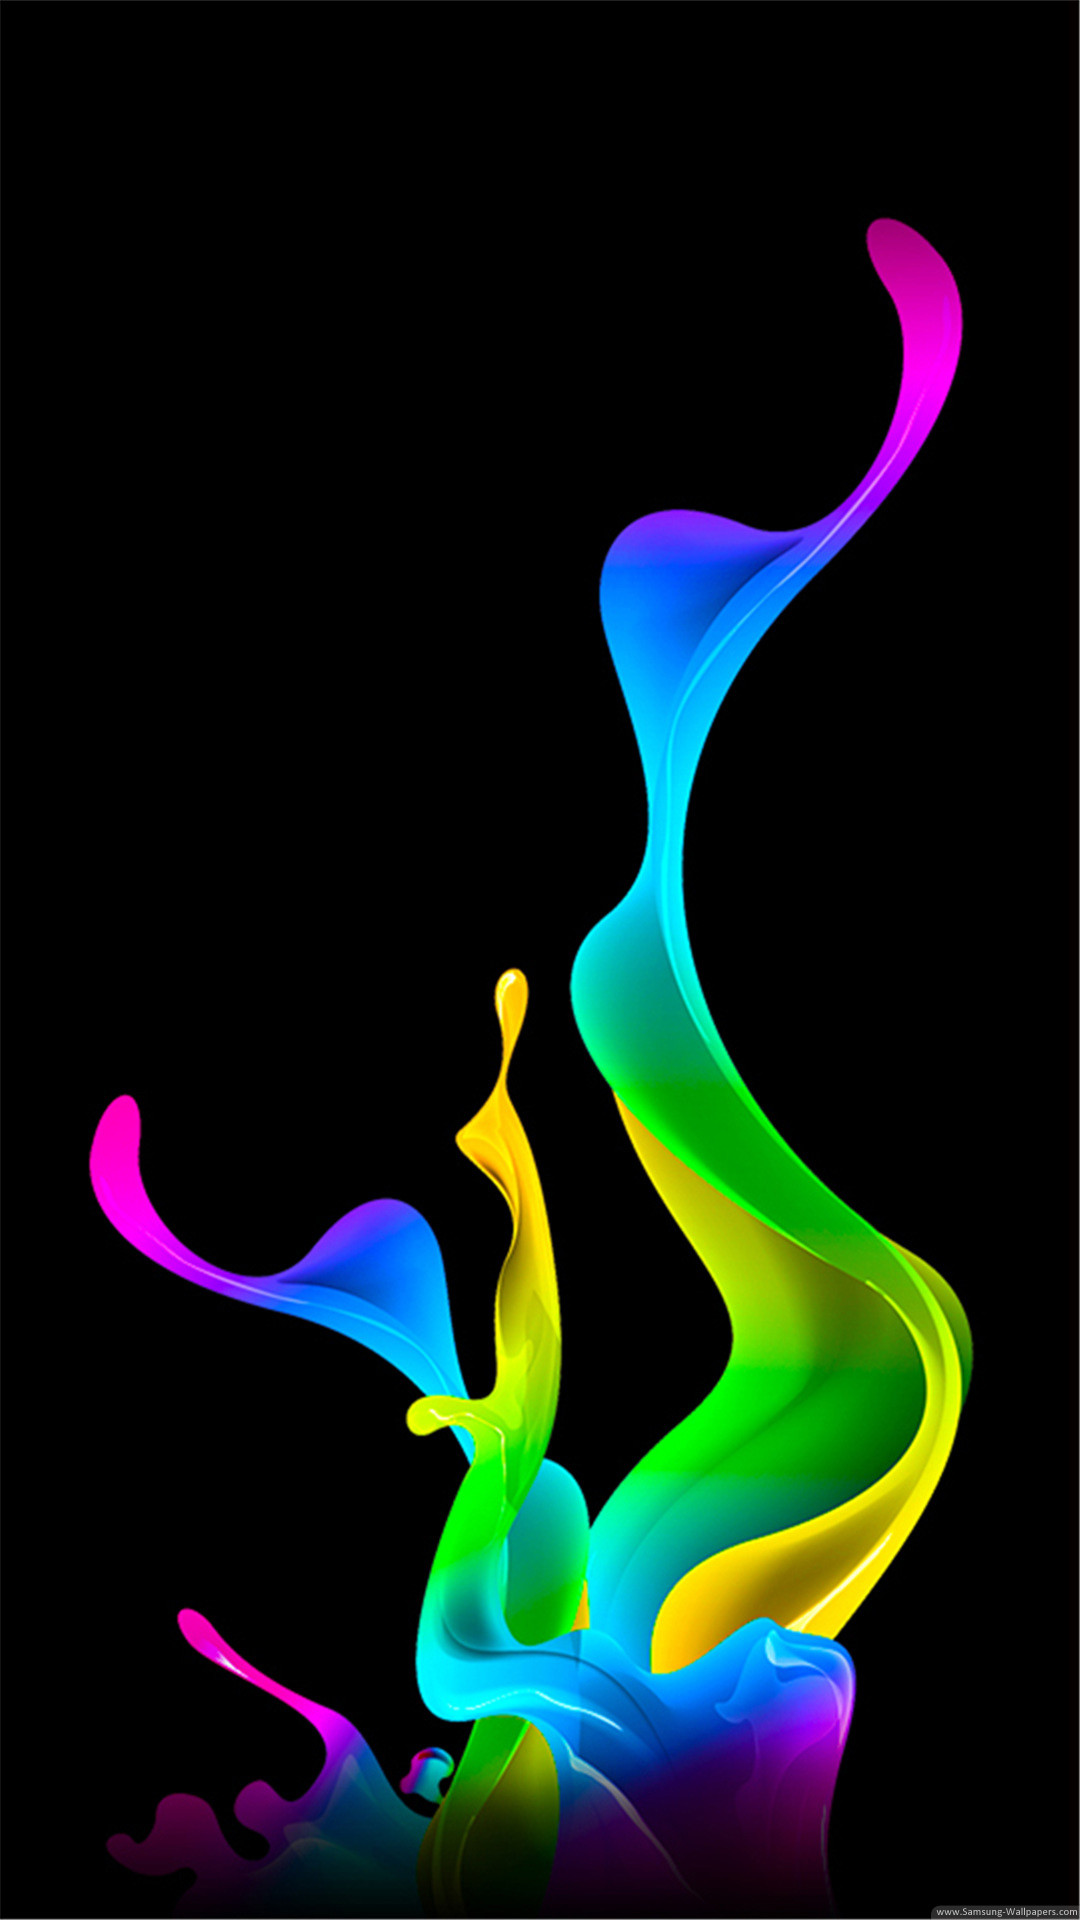 hd amoled wallpapers,organism,flame,smoke,graphic design,electric blue